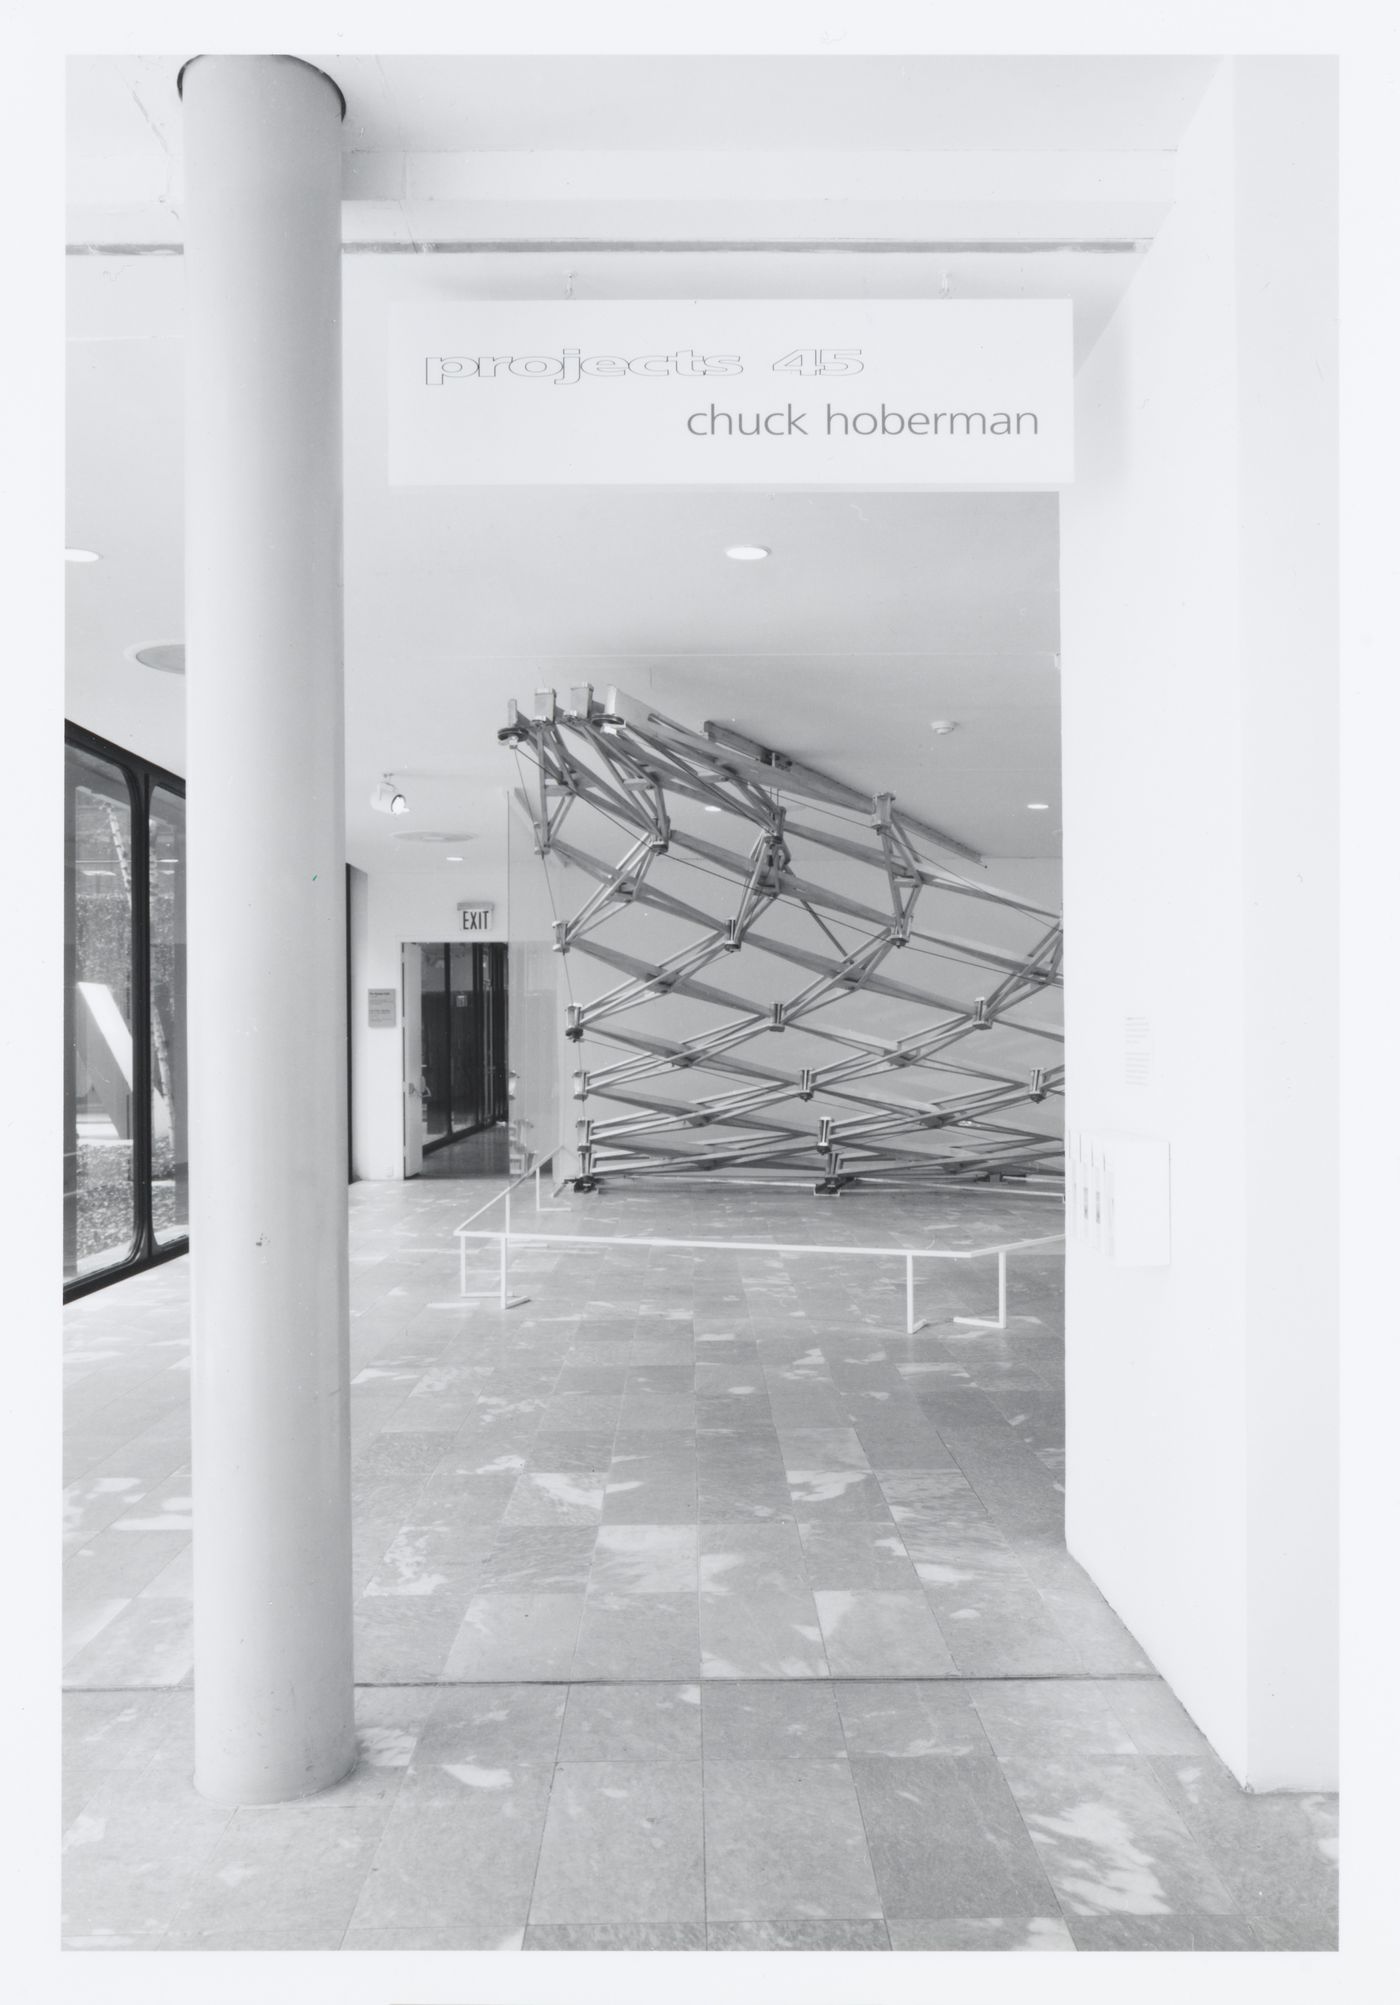 Installation view of the MoMA exhibition Projects 45: Chuck Hoberman